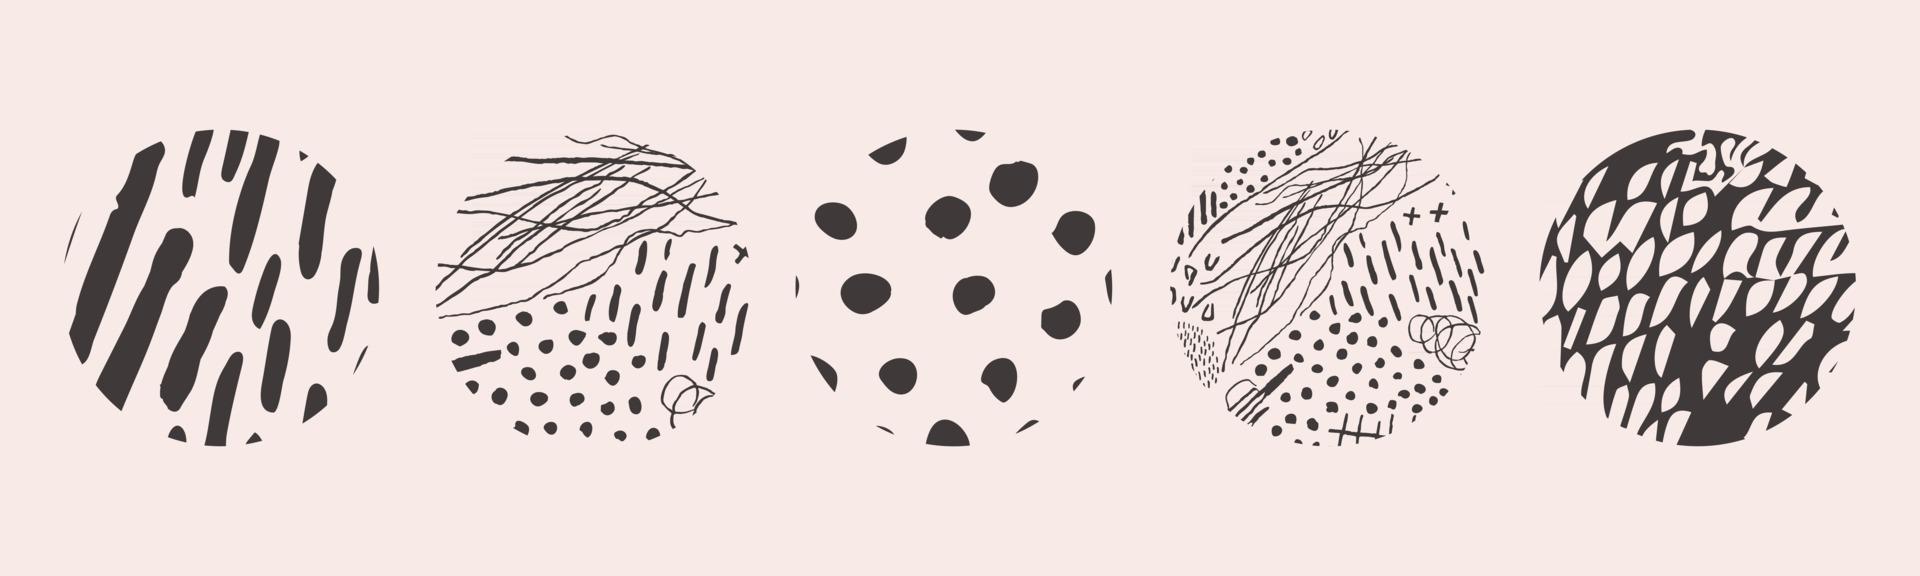 Vector hand drawn set with round isolated abstract black patterns or backgrounds. Various doodle shapes for highlight covers, posters, social media Icons templates.